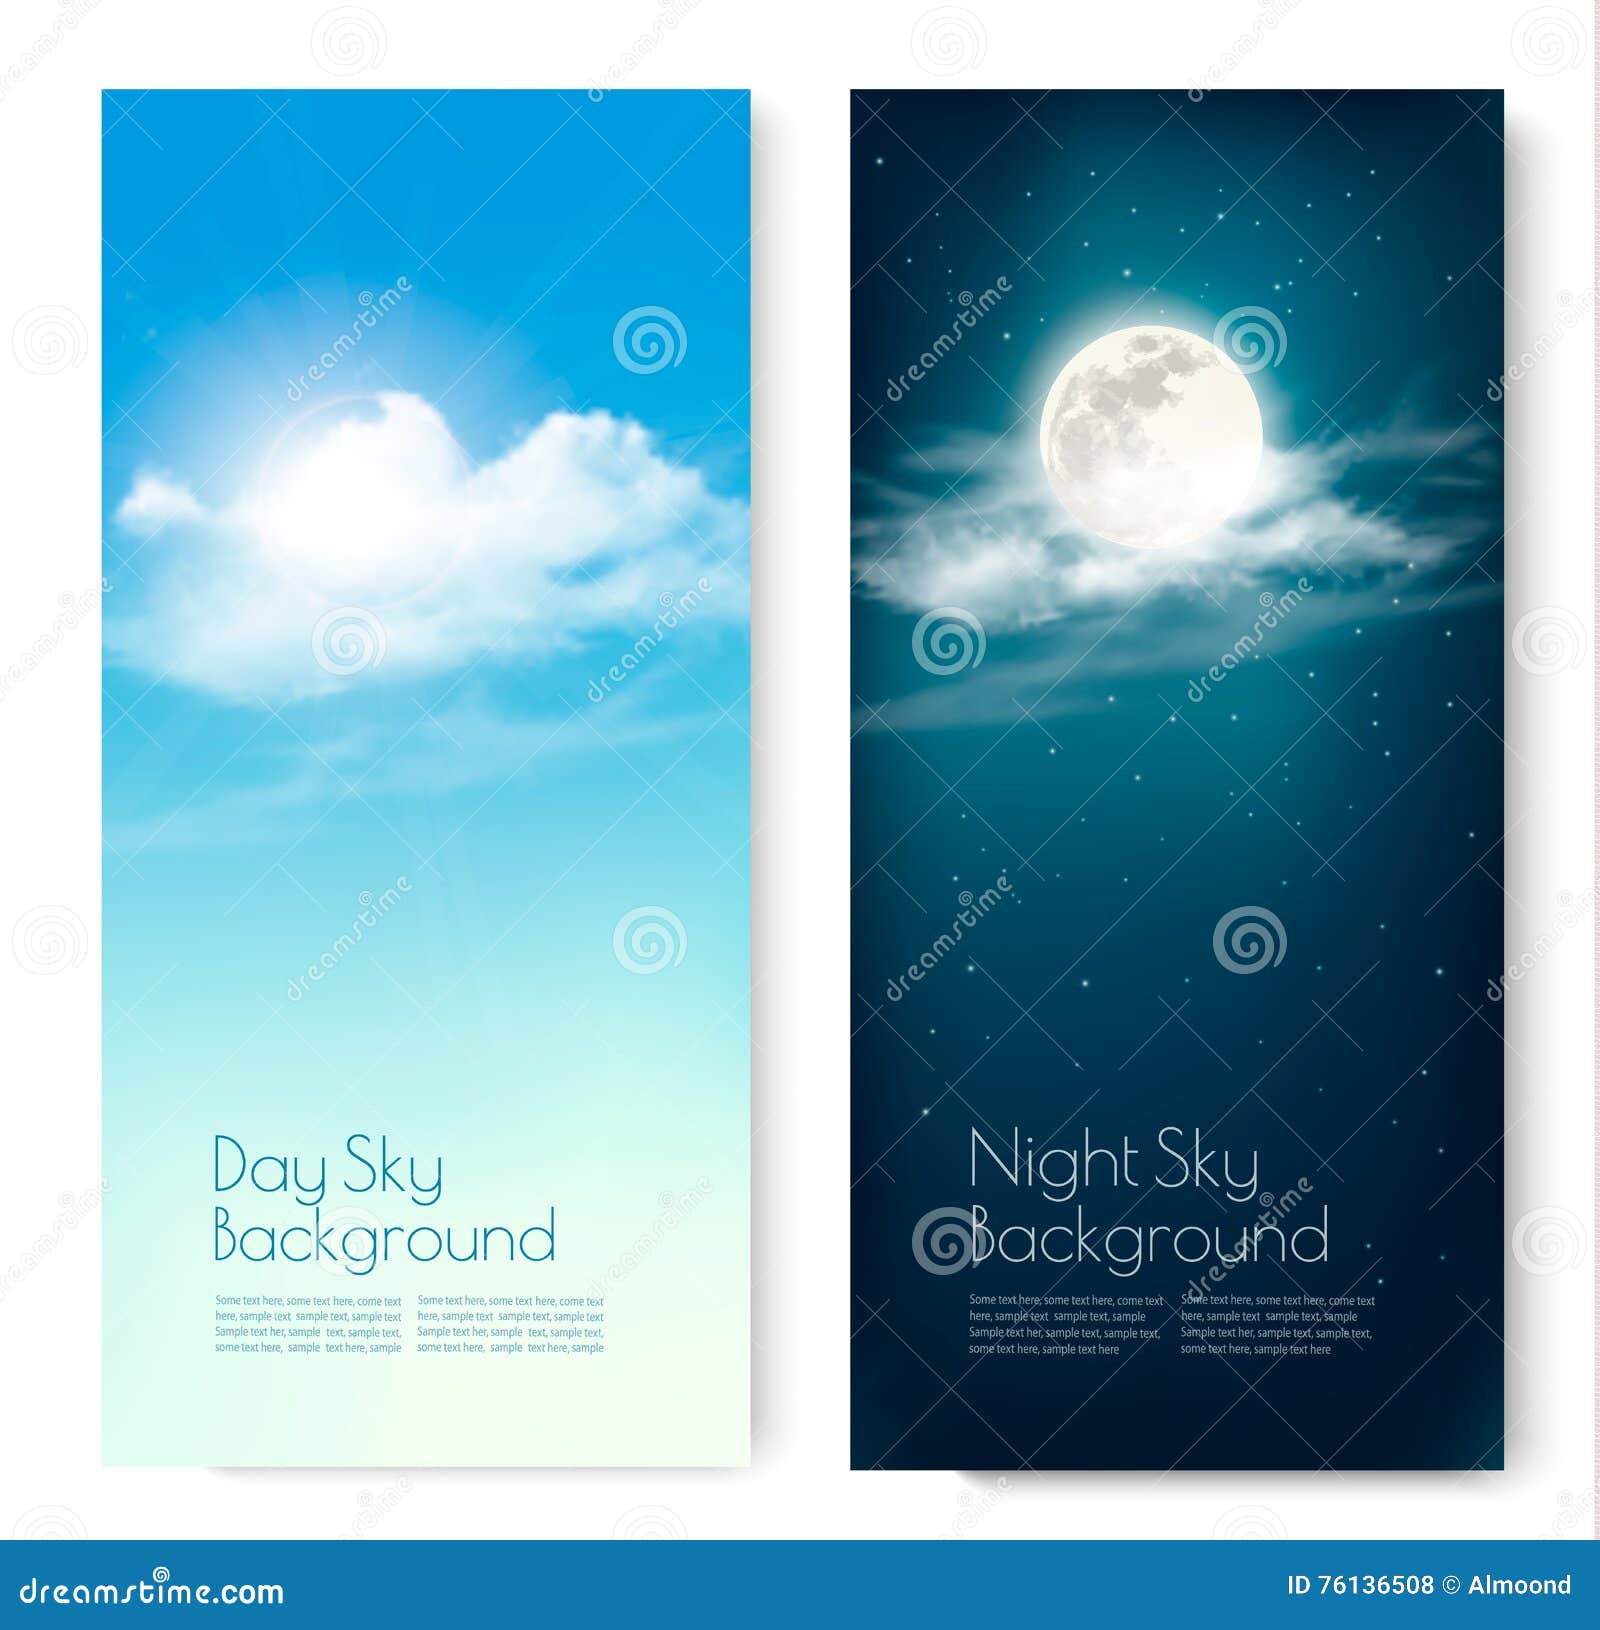 two contrasting sky banners - day and night.